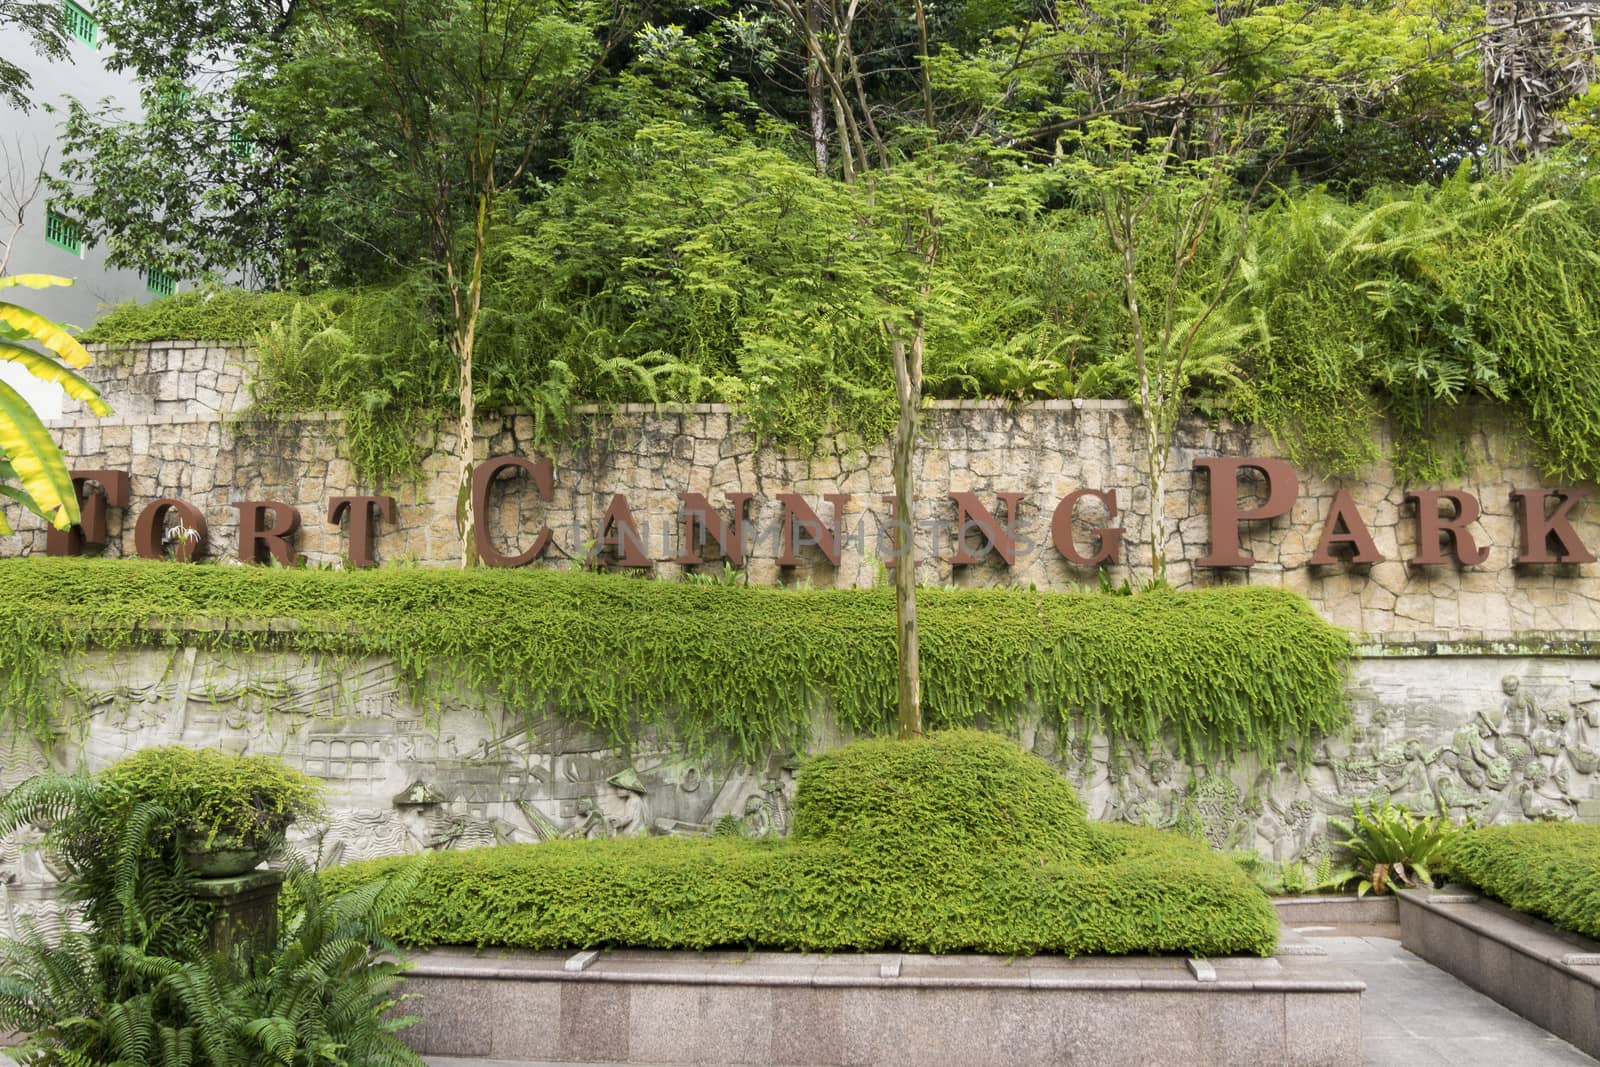 Entrance sign of Fort Canning park in Singapore